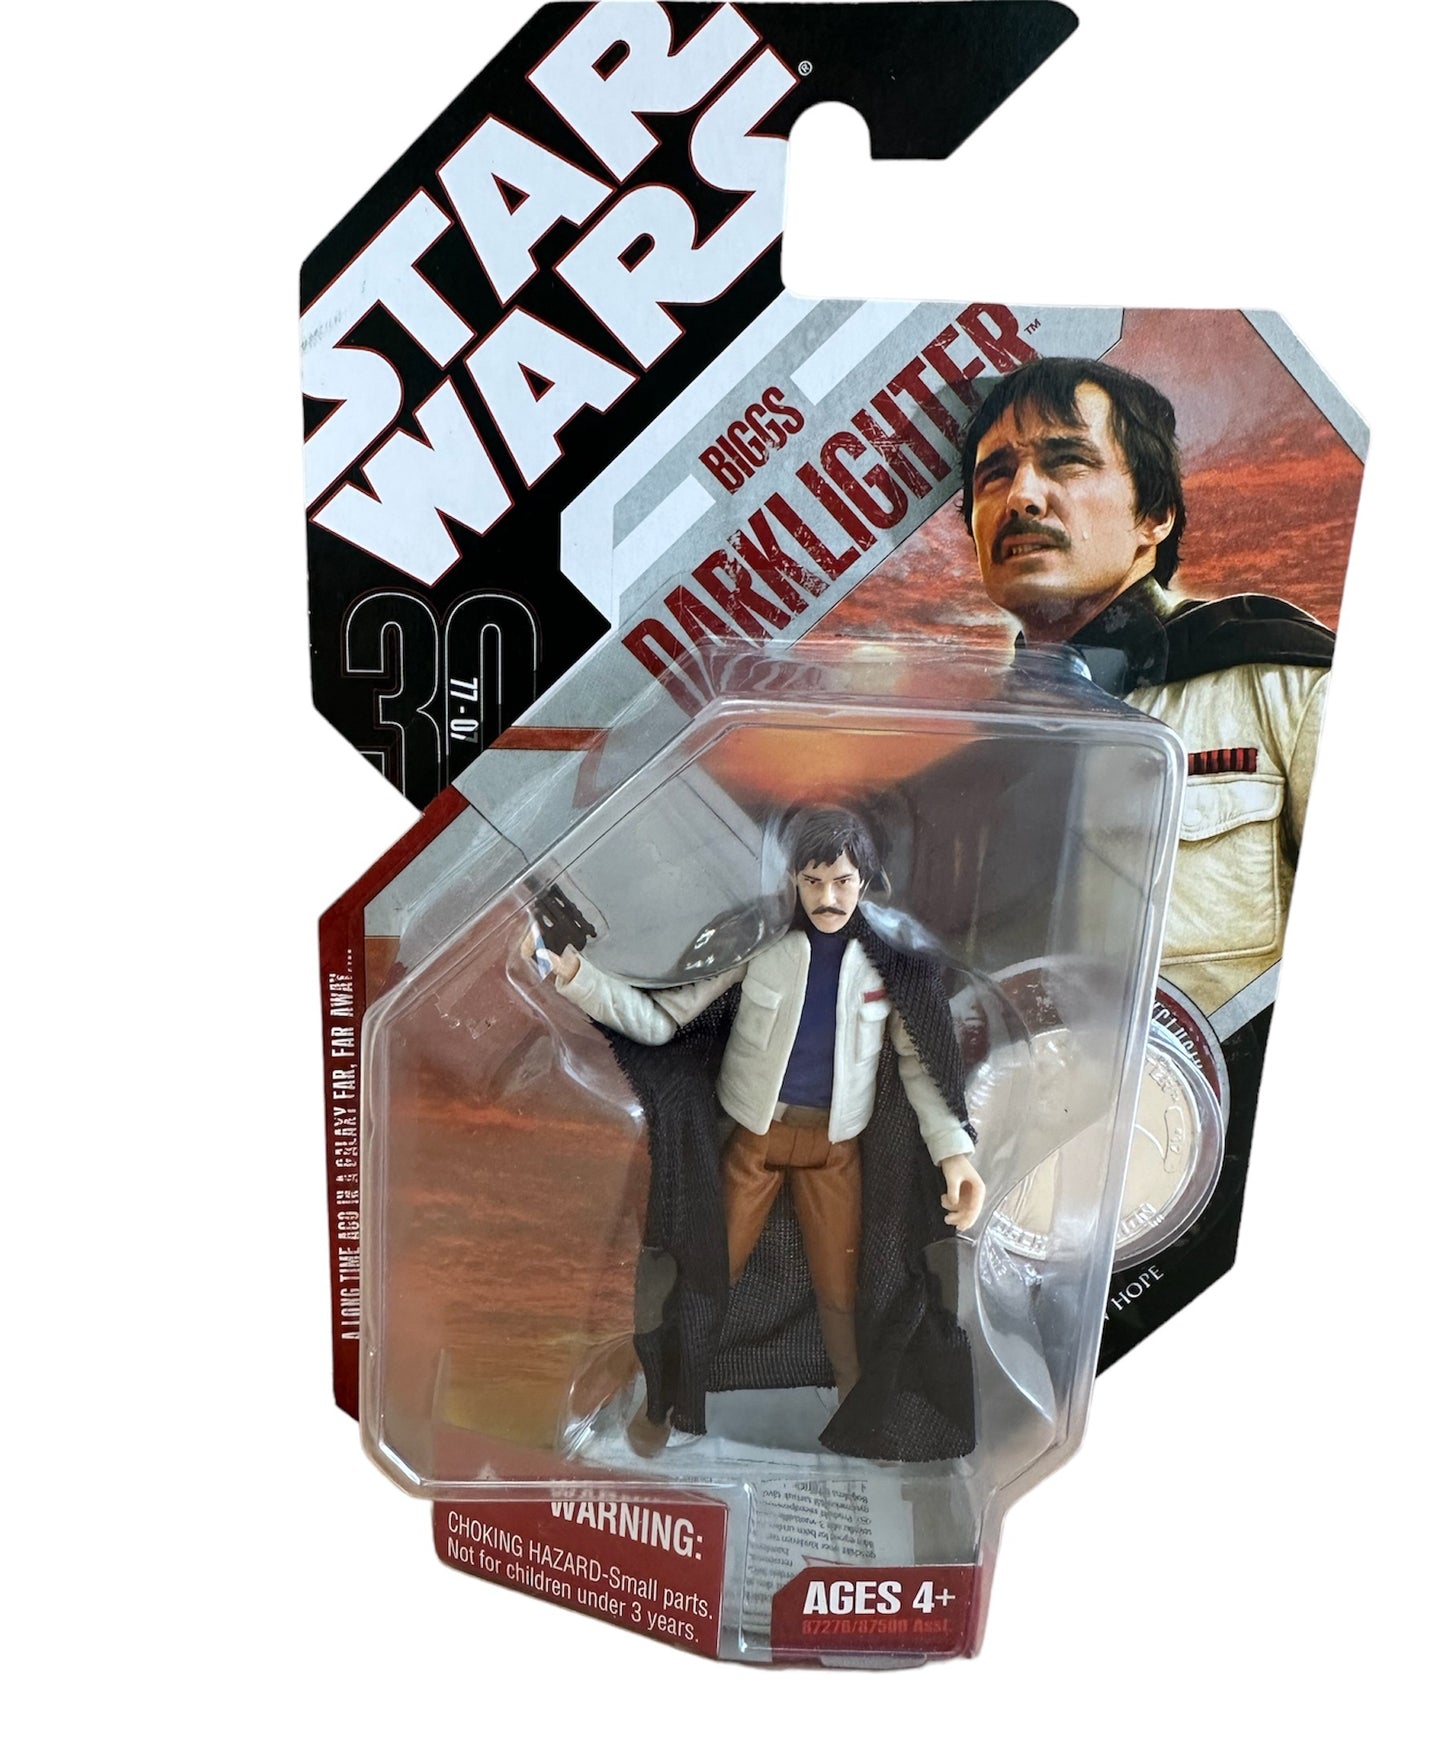 Vintage 2007 Star Wars Saga 30th Anniversary A New Hope Biggs Darklighter Action Figure With Exclusive Collector Coin - Brand New Factory Sealed Shop Stock Room Find